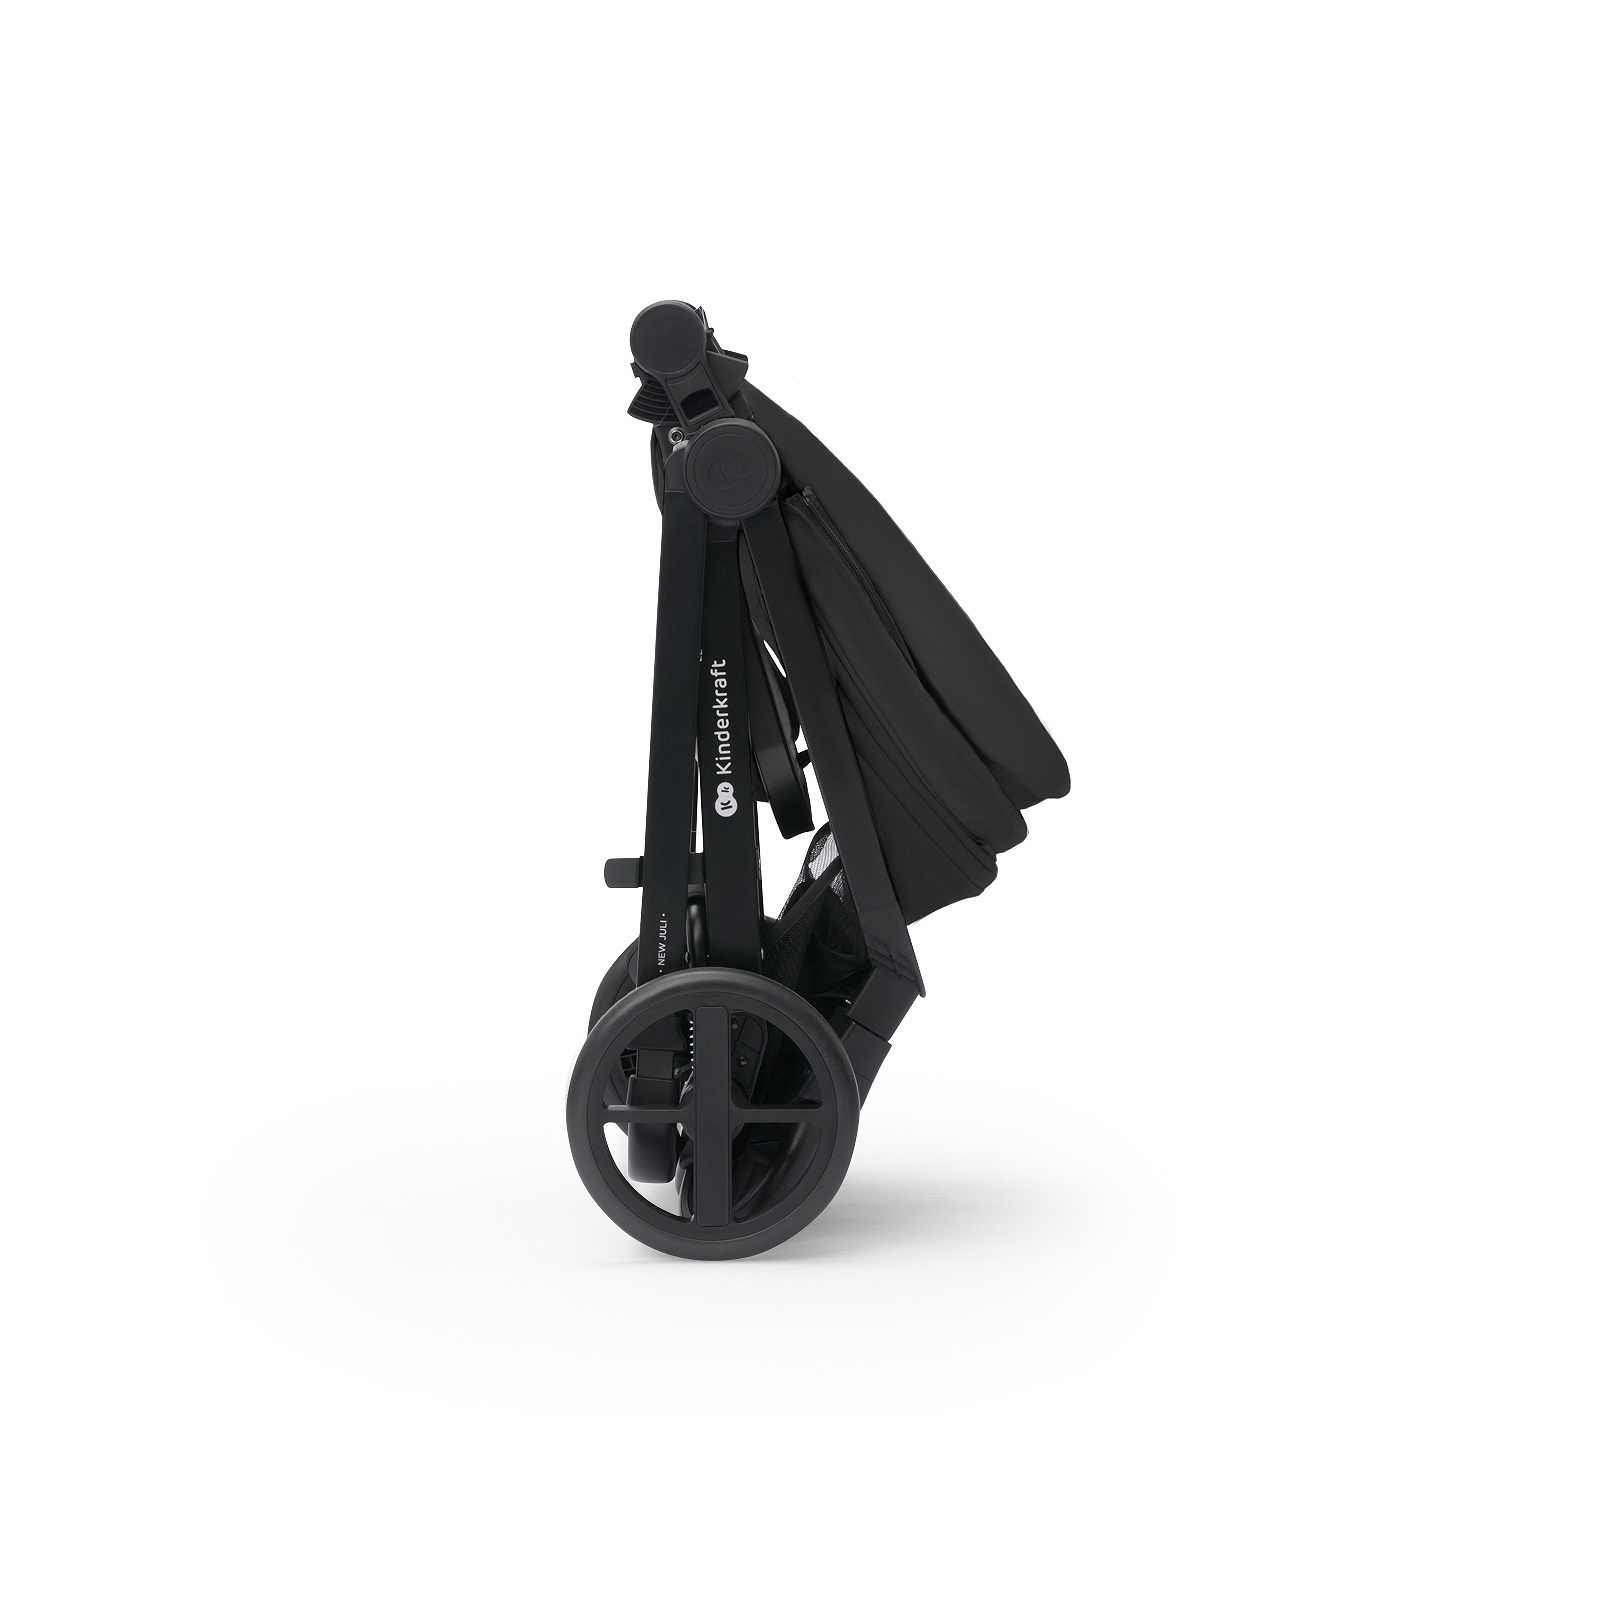 Travel System 4in1 NEWLY black